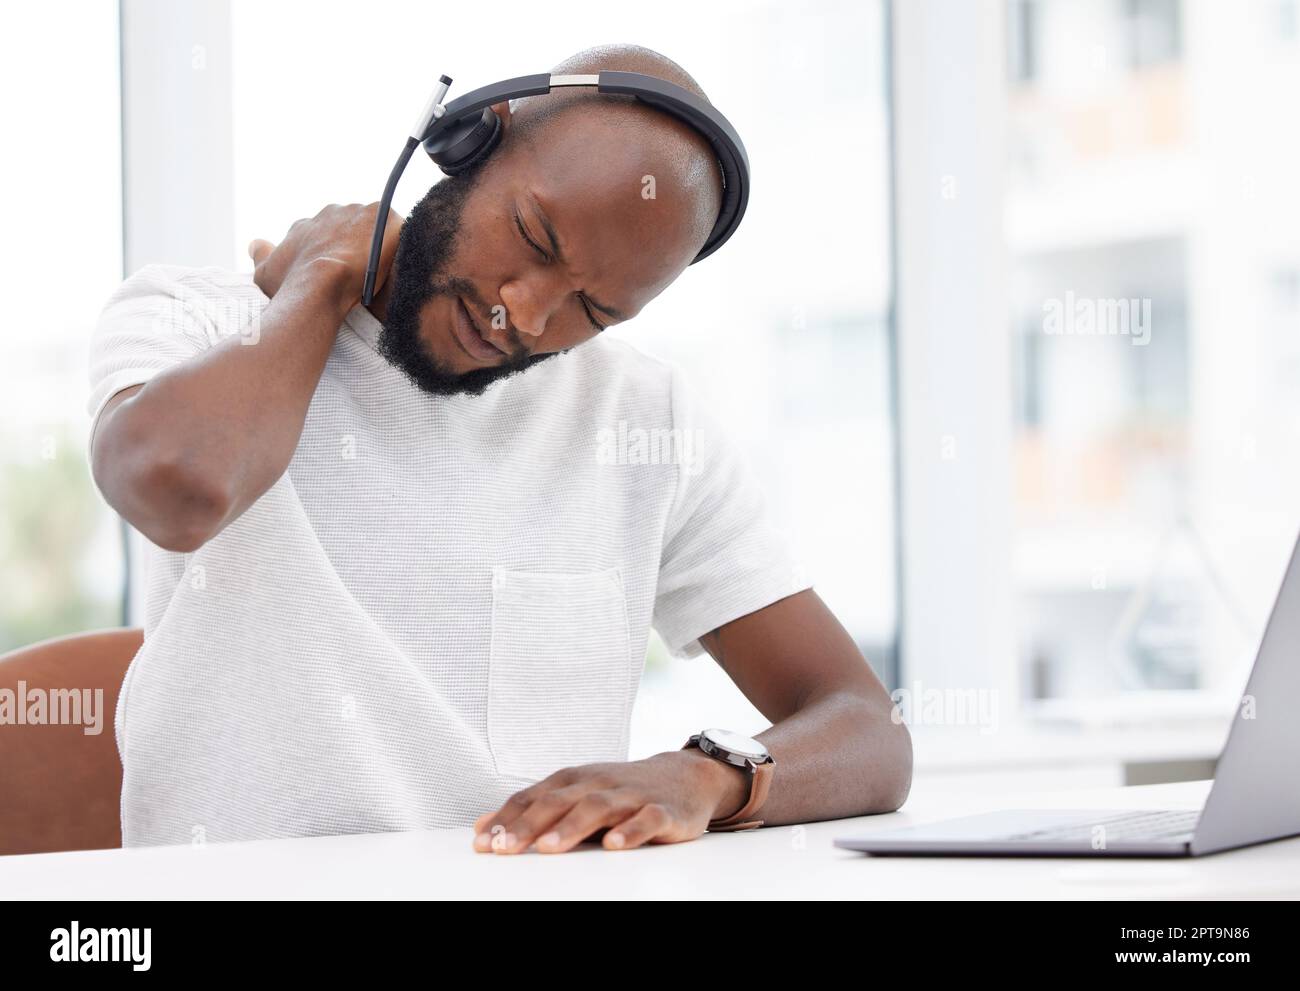 This neck cramp is no joke. a young male call center worker experiencing neck pain at work Stock Photo